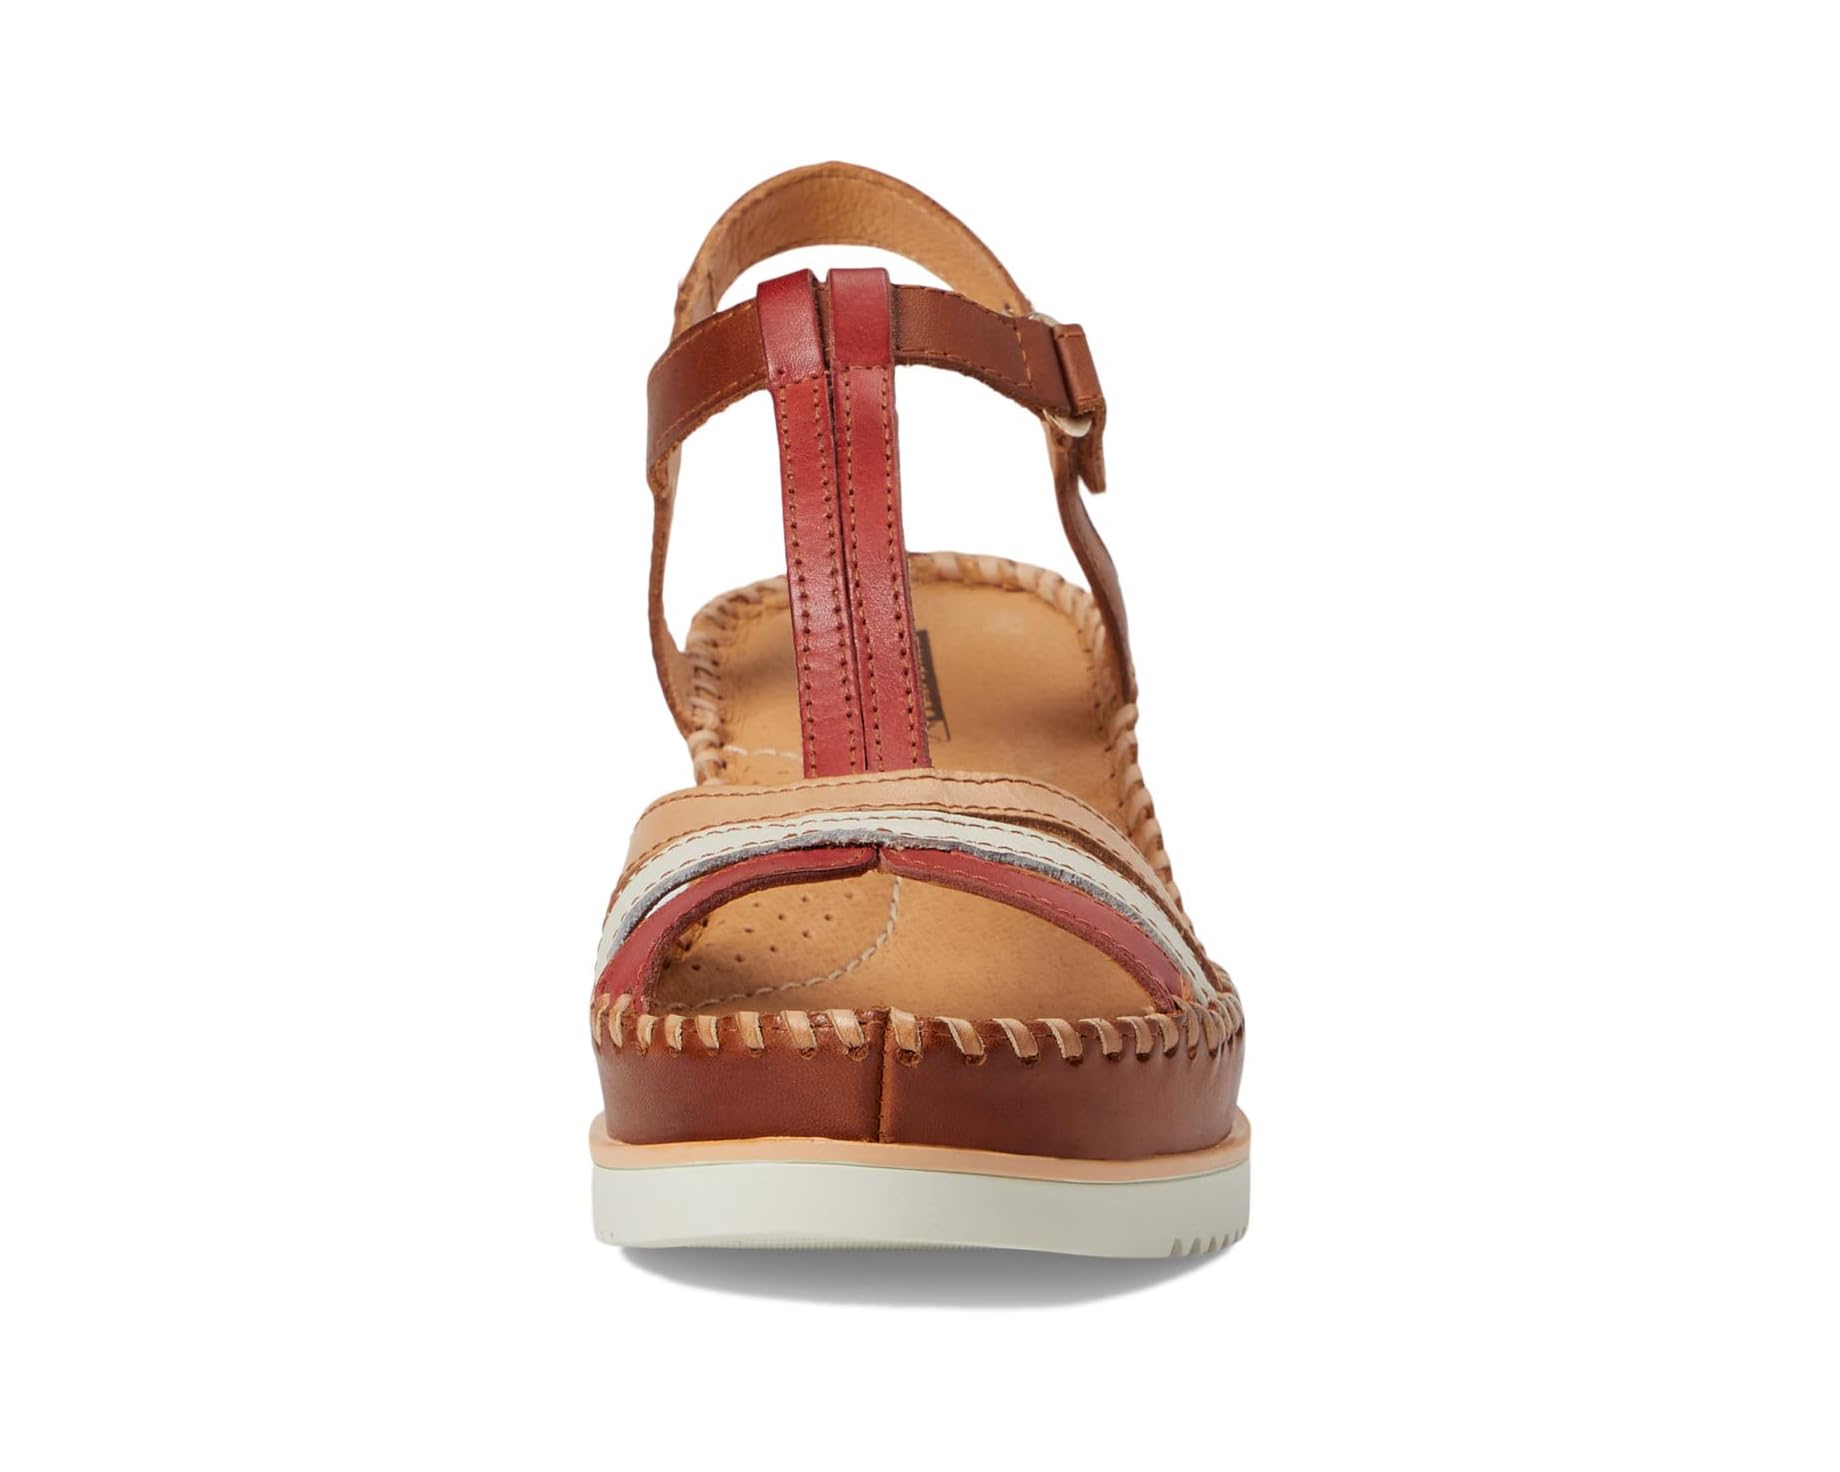 Pikolinos Aguadulce Wedge Sandals Women's 11